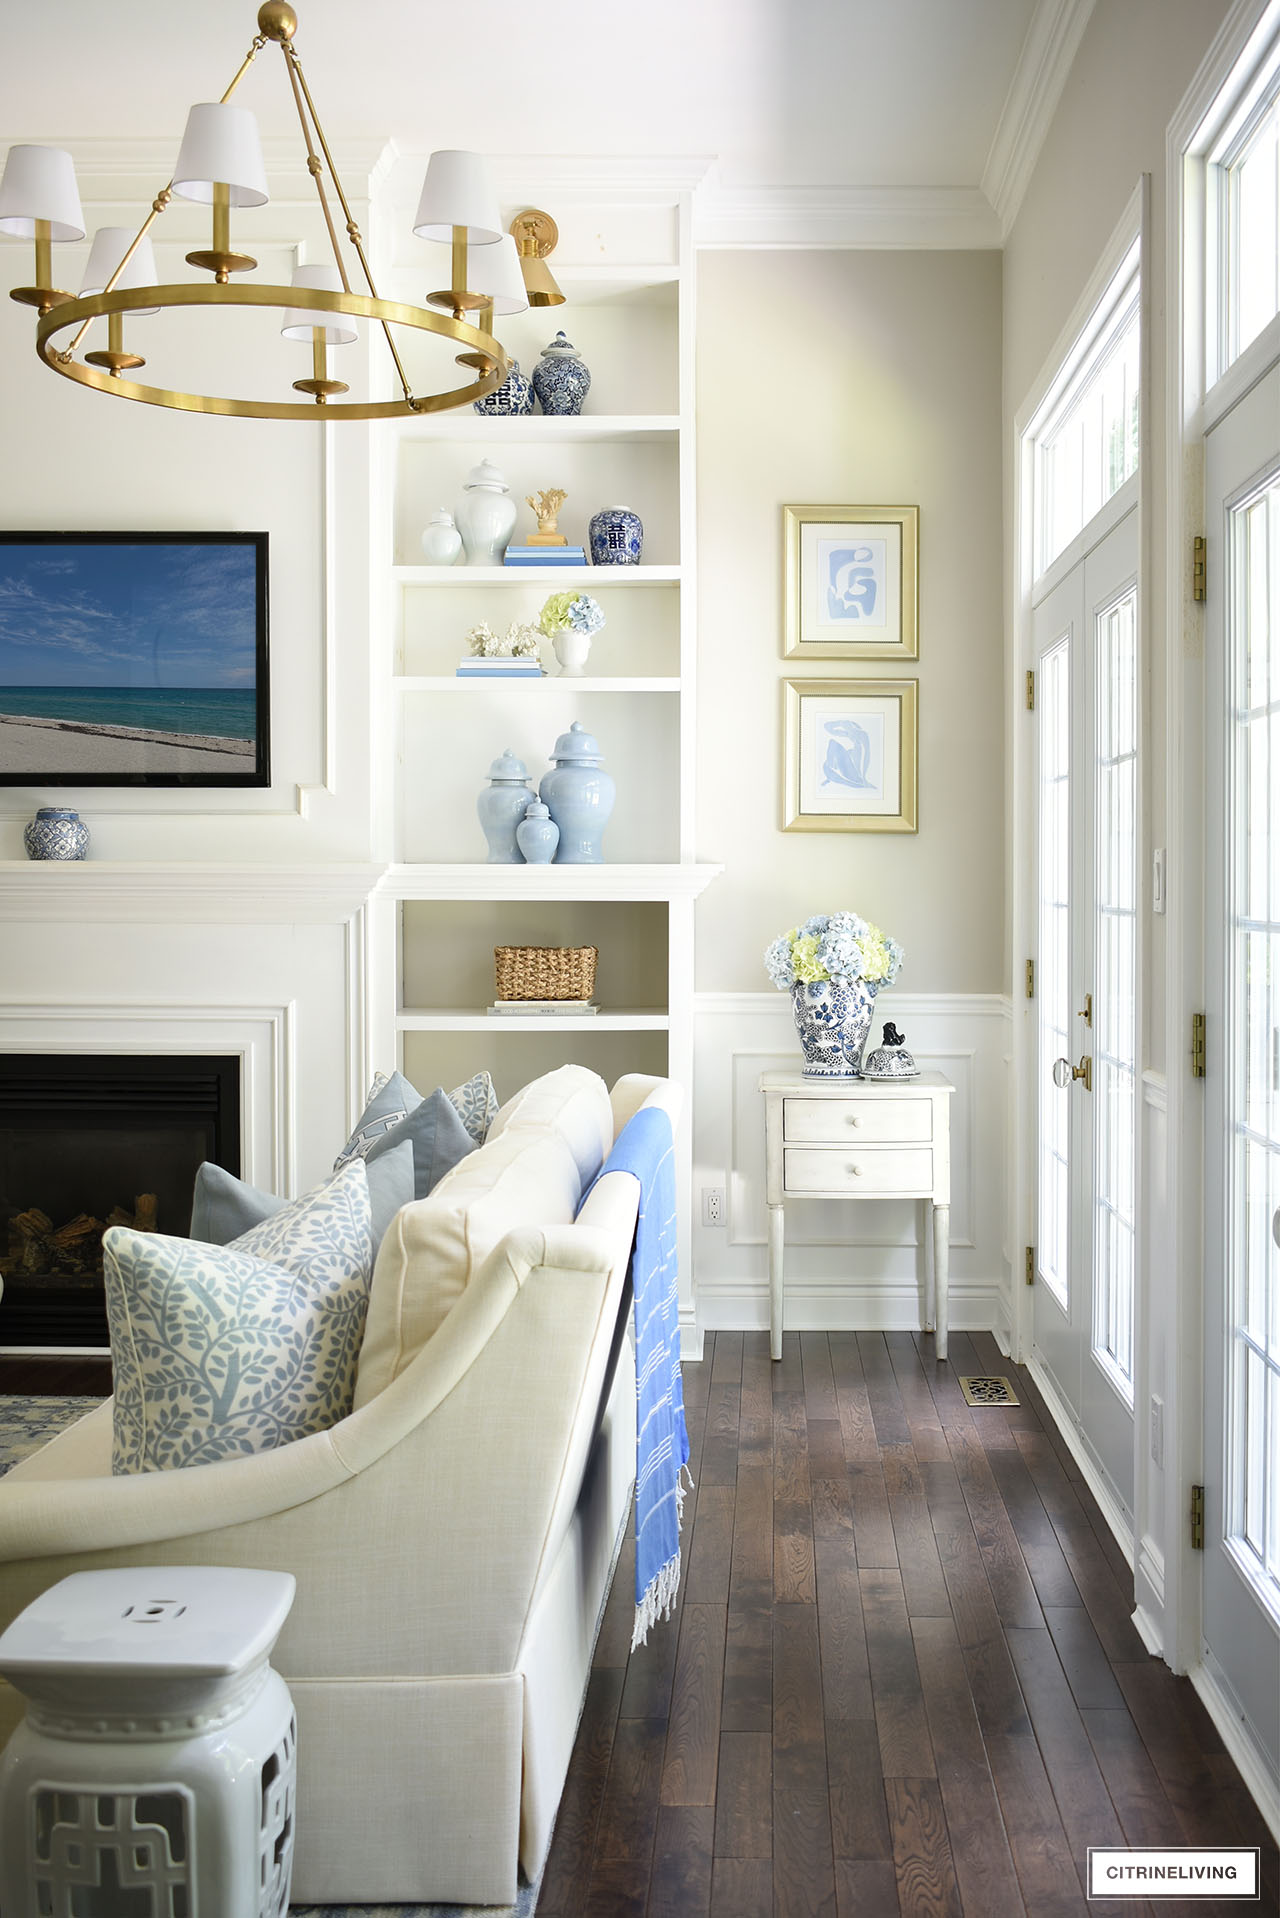 Living room bookshelves styled with blue and white ginger jars, baskets, hydrangeas and coastal accents for summer.